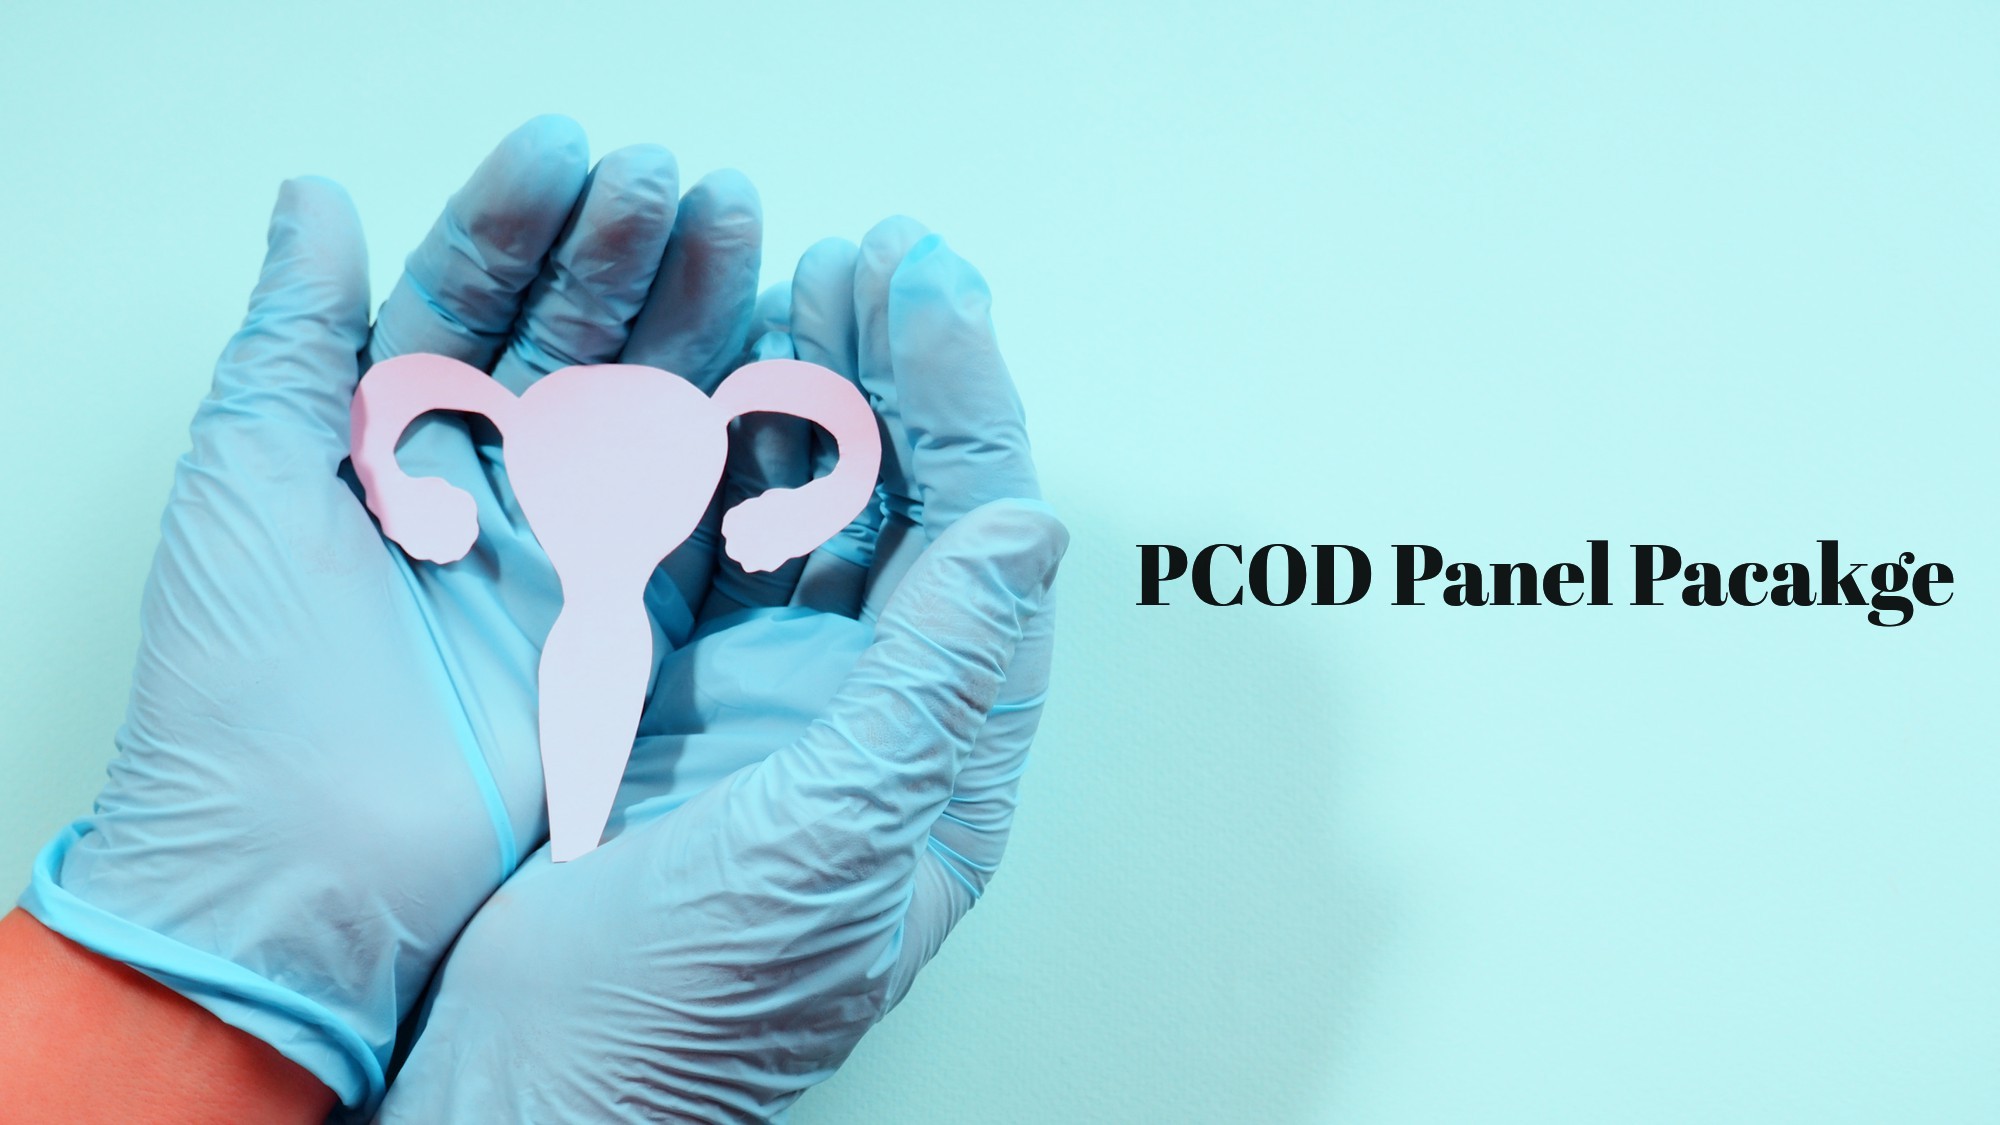 PCOD Panel Package